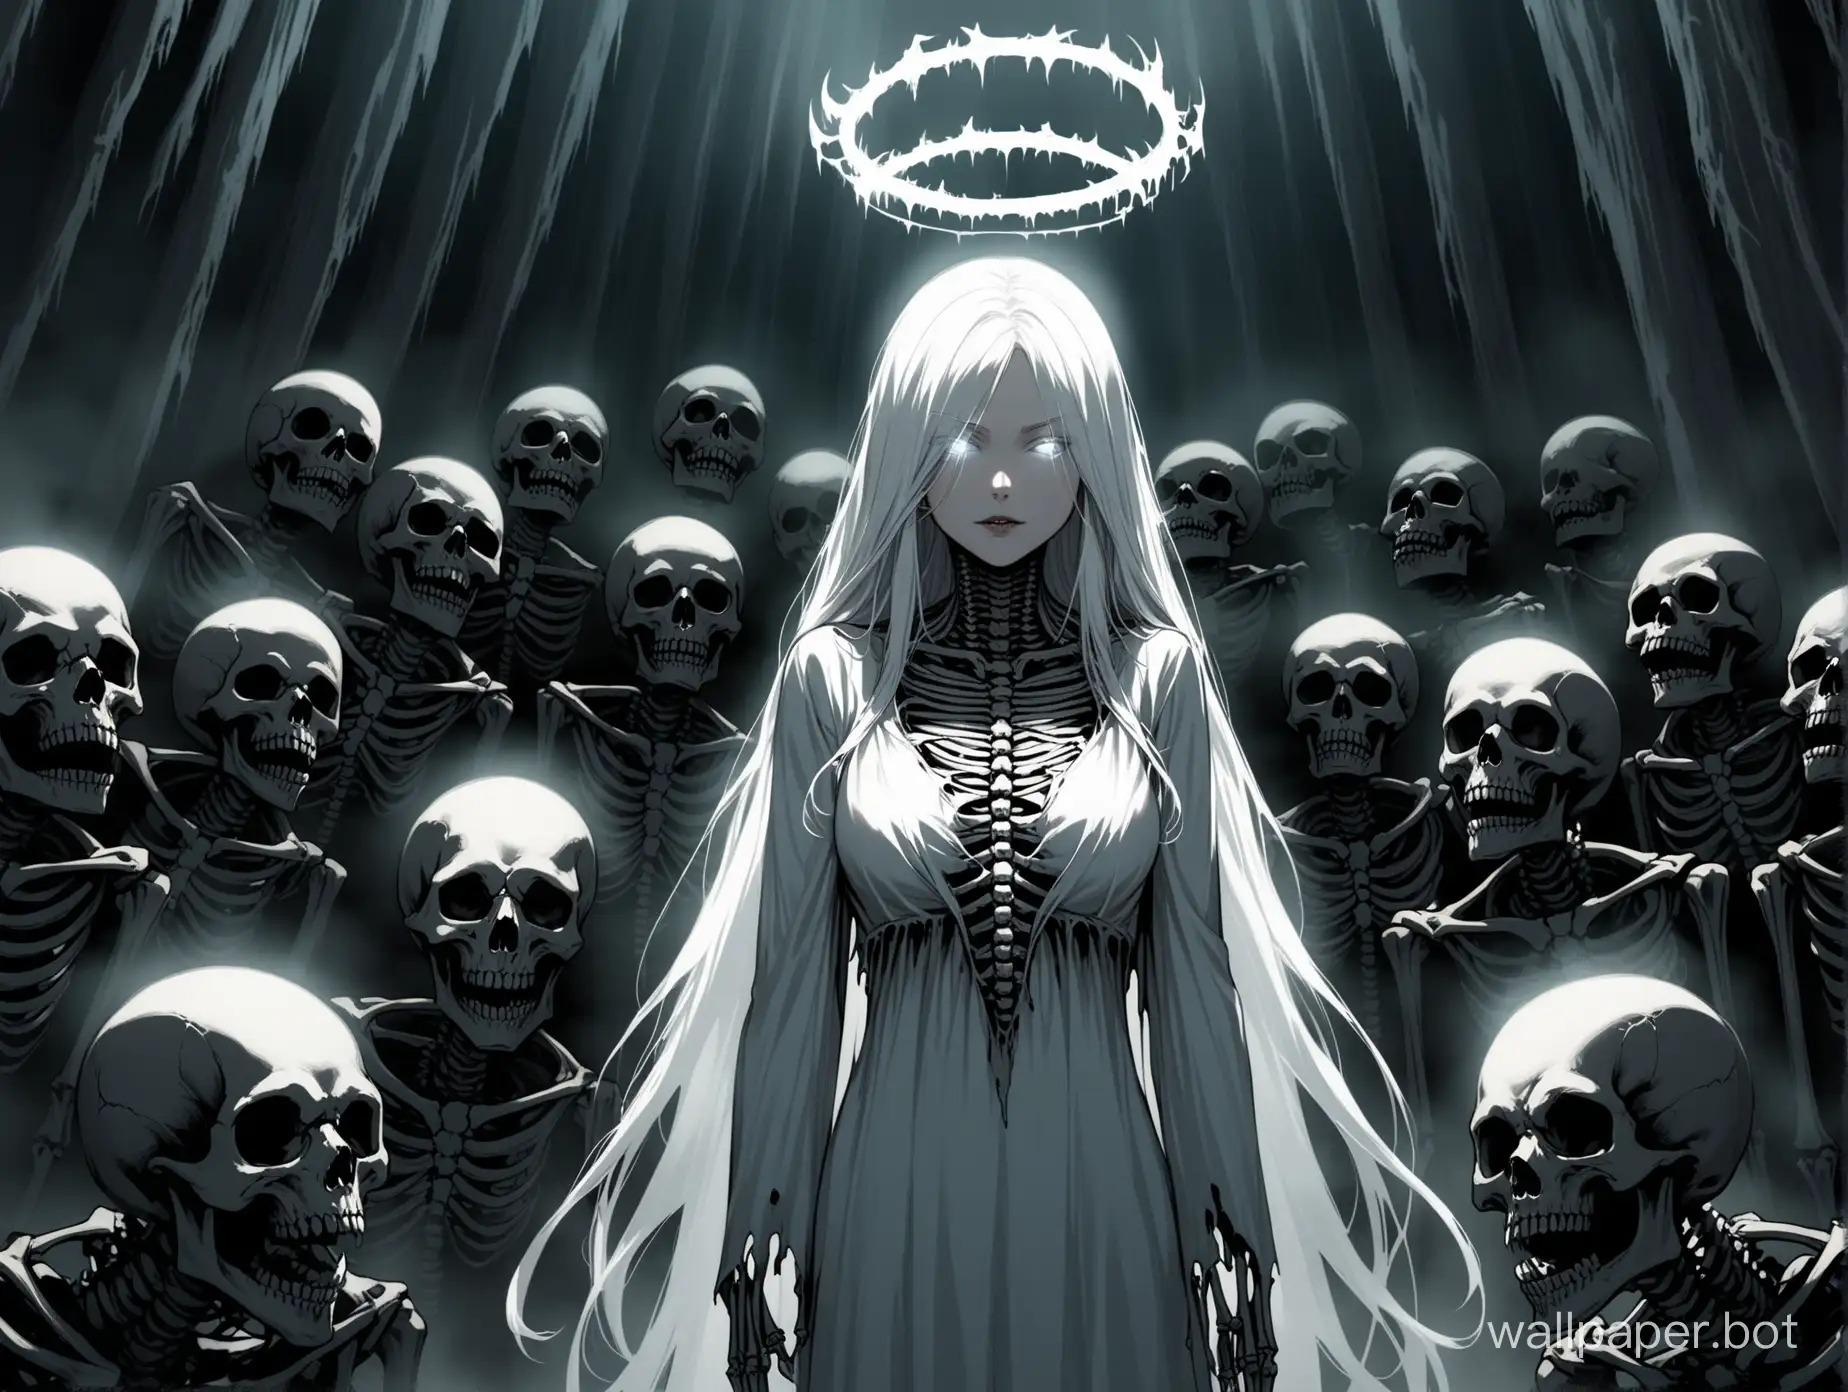 Sinister-WhiteHaired-Woman-with-Unholy-Aura-Amongst-Sinister-Skeletons